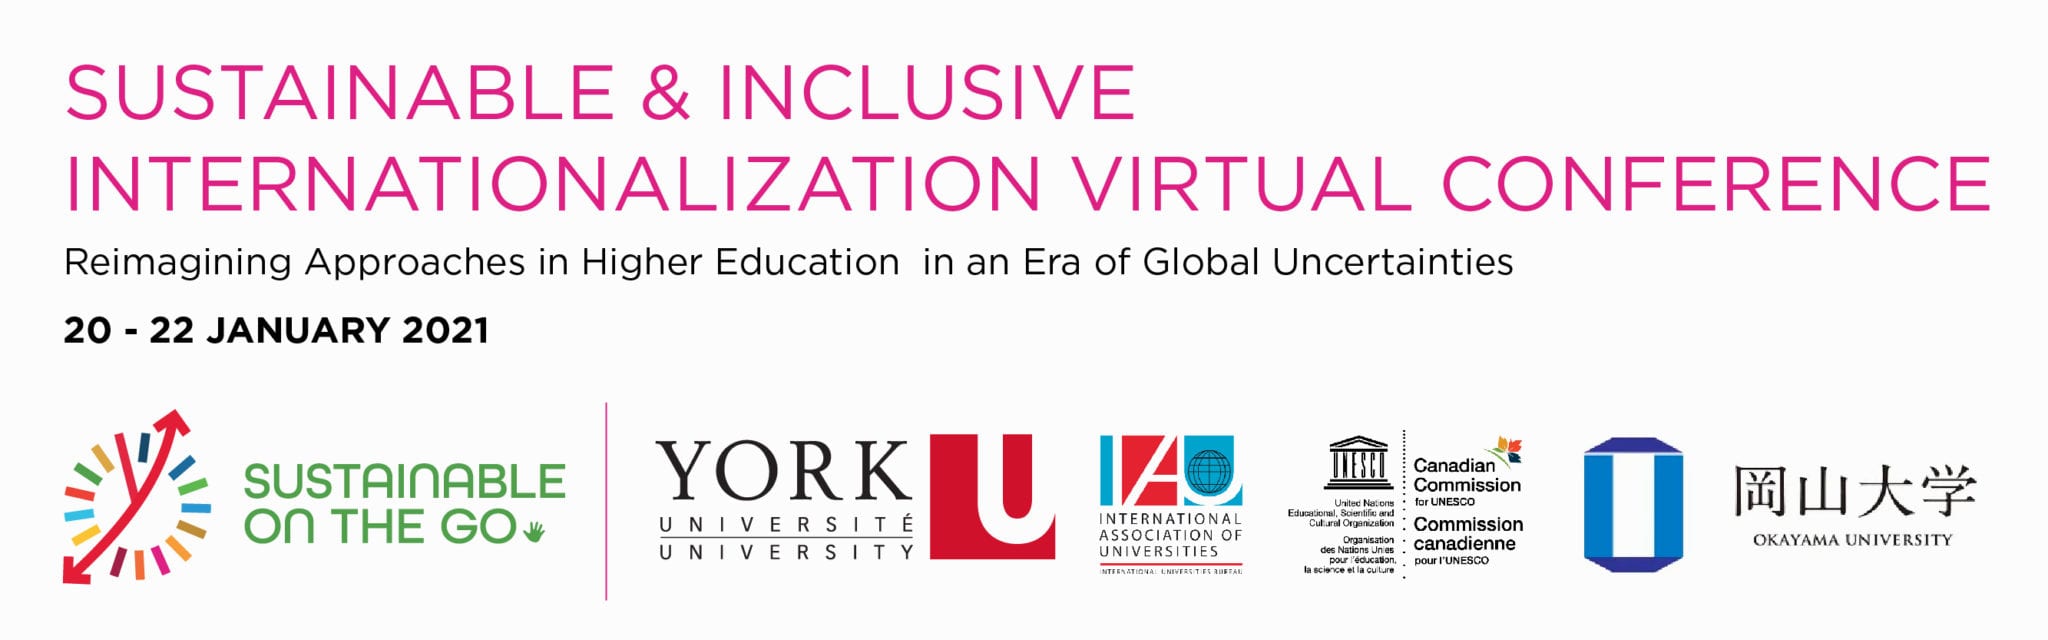  International Virtual Conference Sustainable and Inclusive Internationalization: Reimagining Approaches in Higher Education in an Era of Global Uncertainties 20 - 22 January 2021